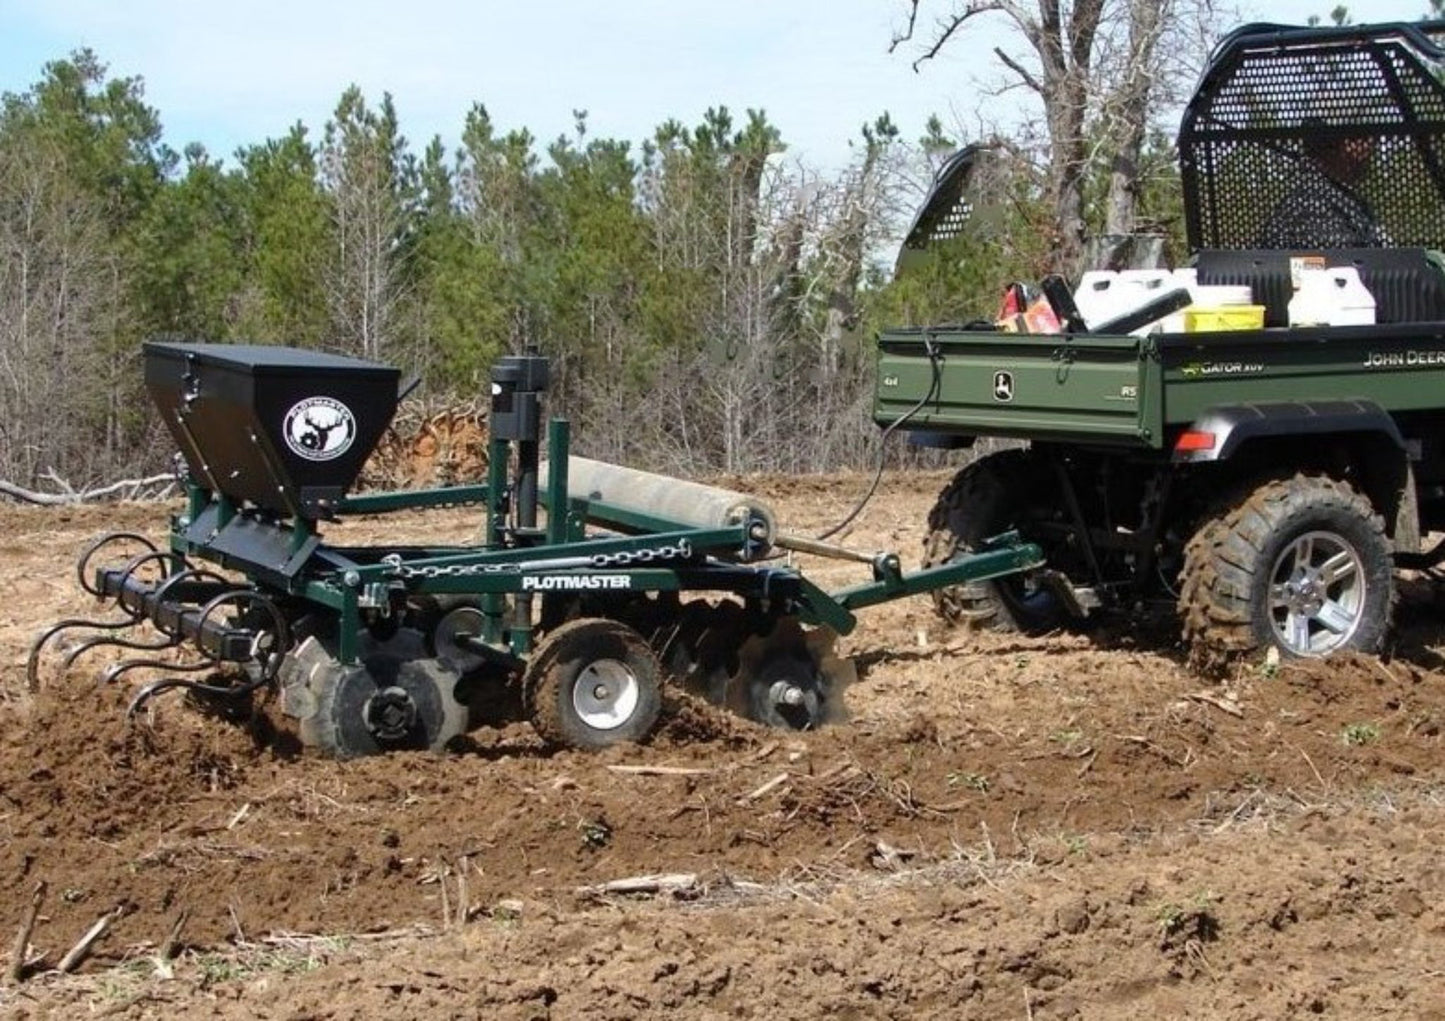 PLOTMASTER 5' FT. HUNTER 500 WITH REVERSE AUGER BRUSH FOR UTVs & COMPACT TRACTORS